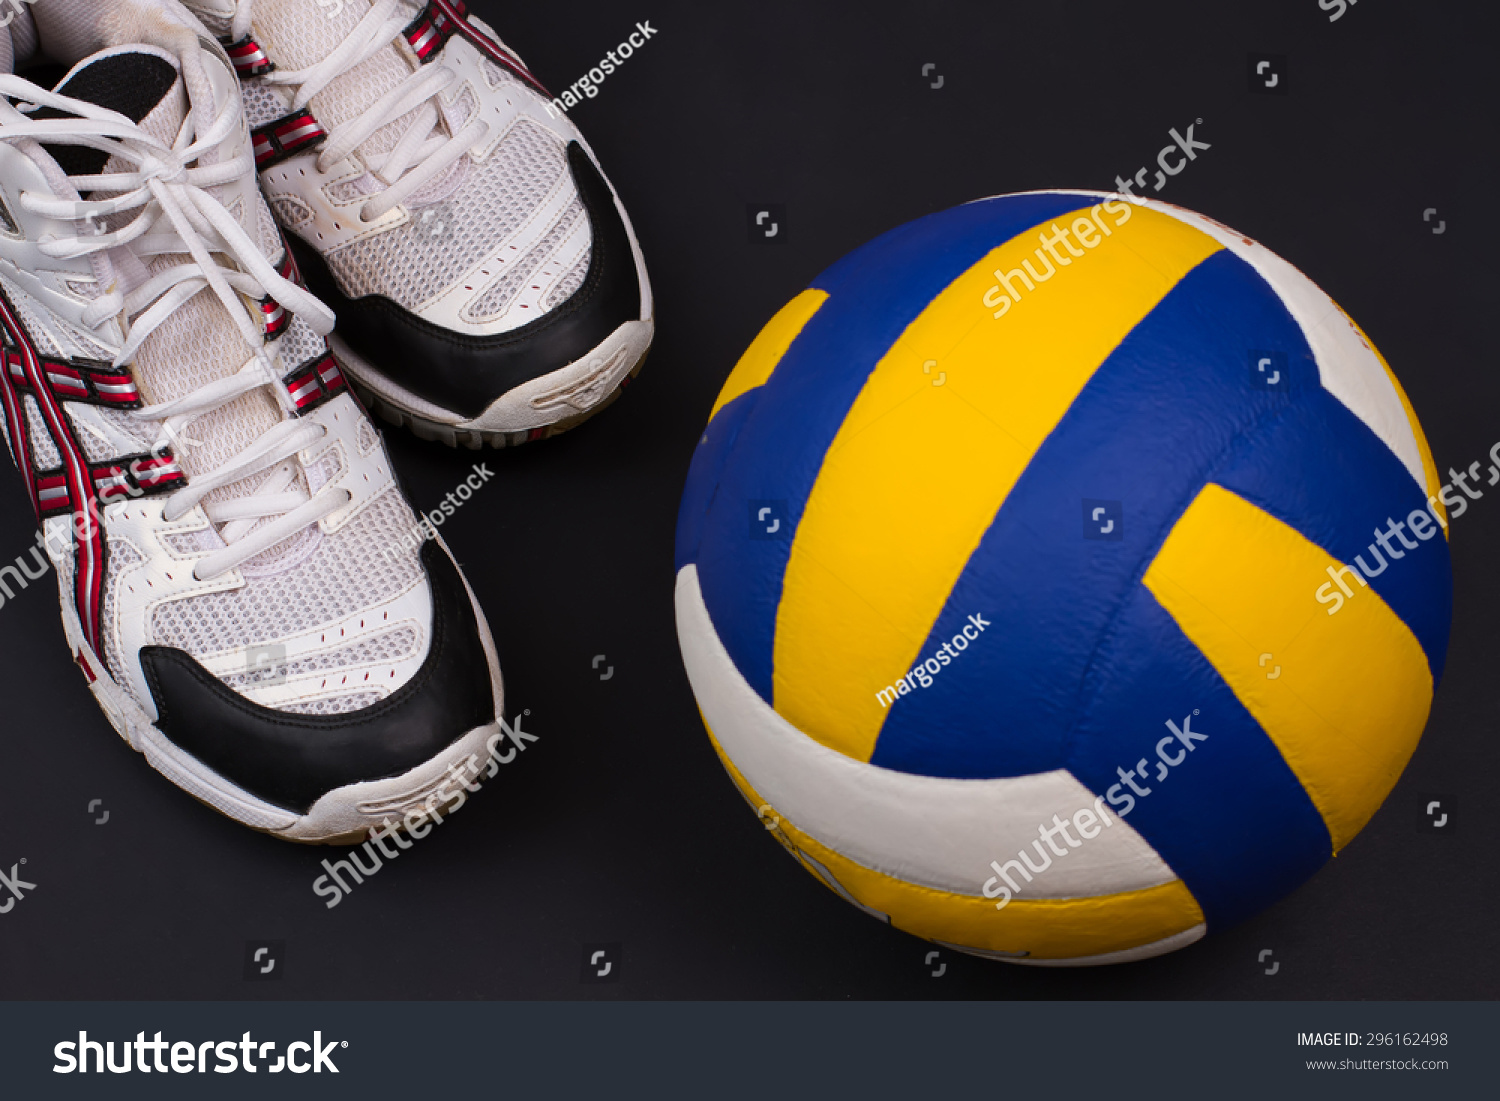 can running shoes be used for volleyball